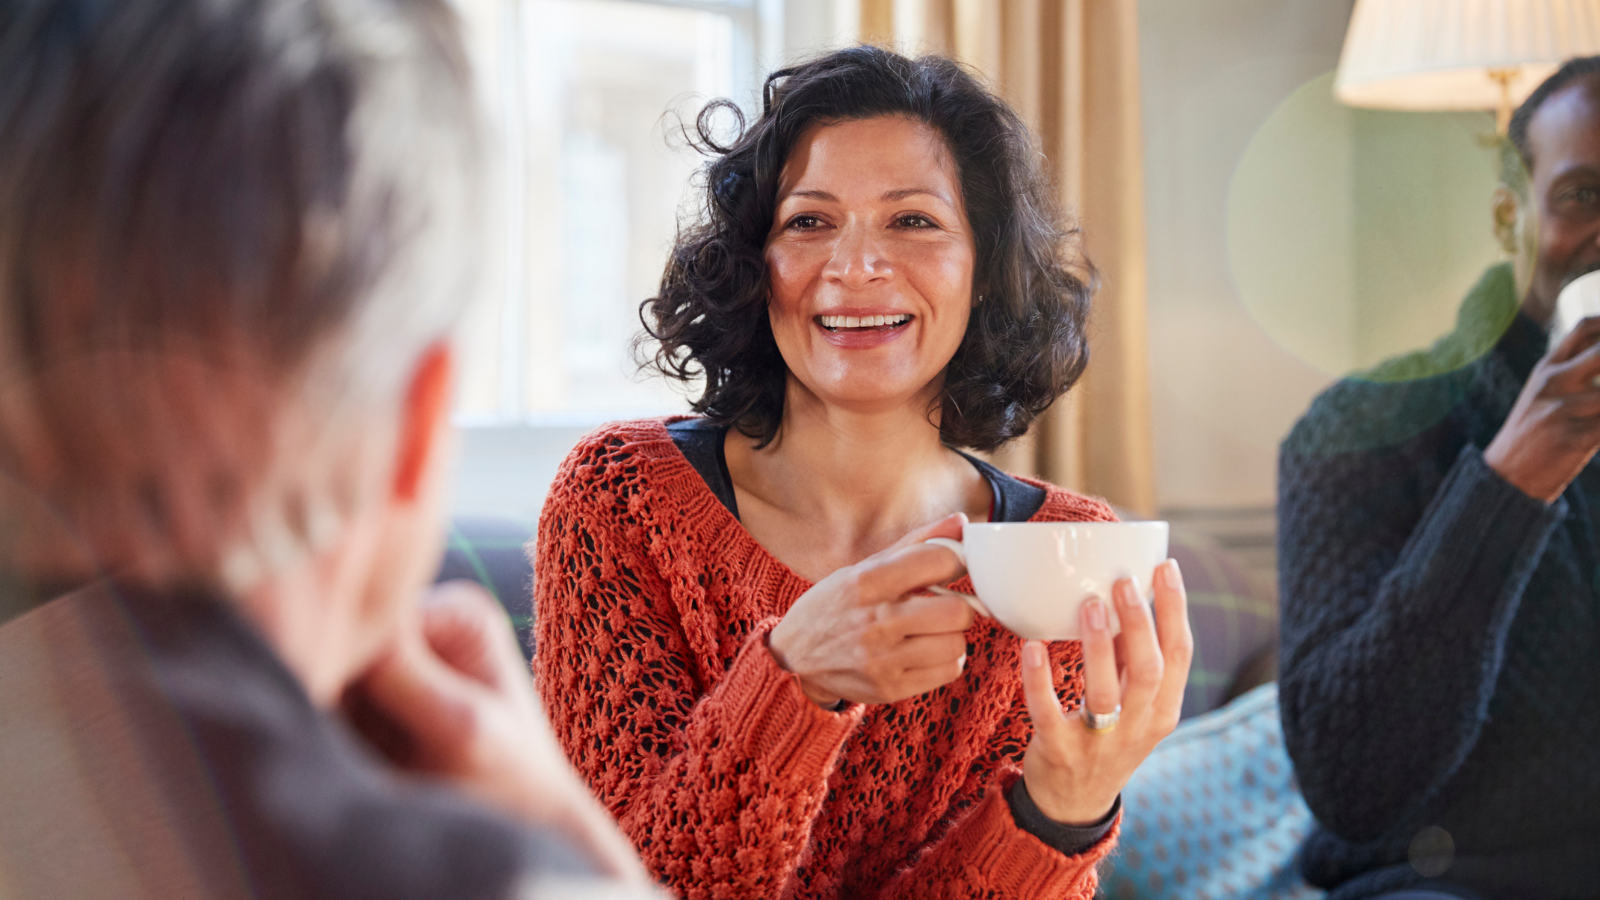 A woman chatting and enjoying coffee with others